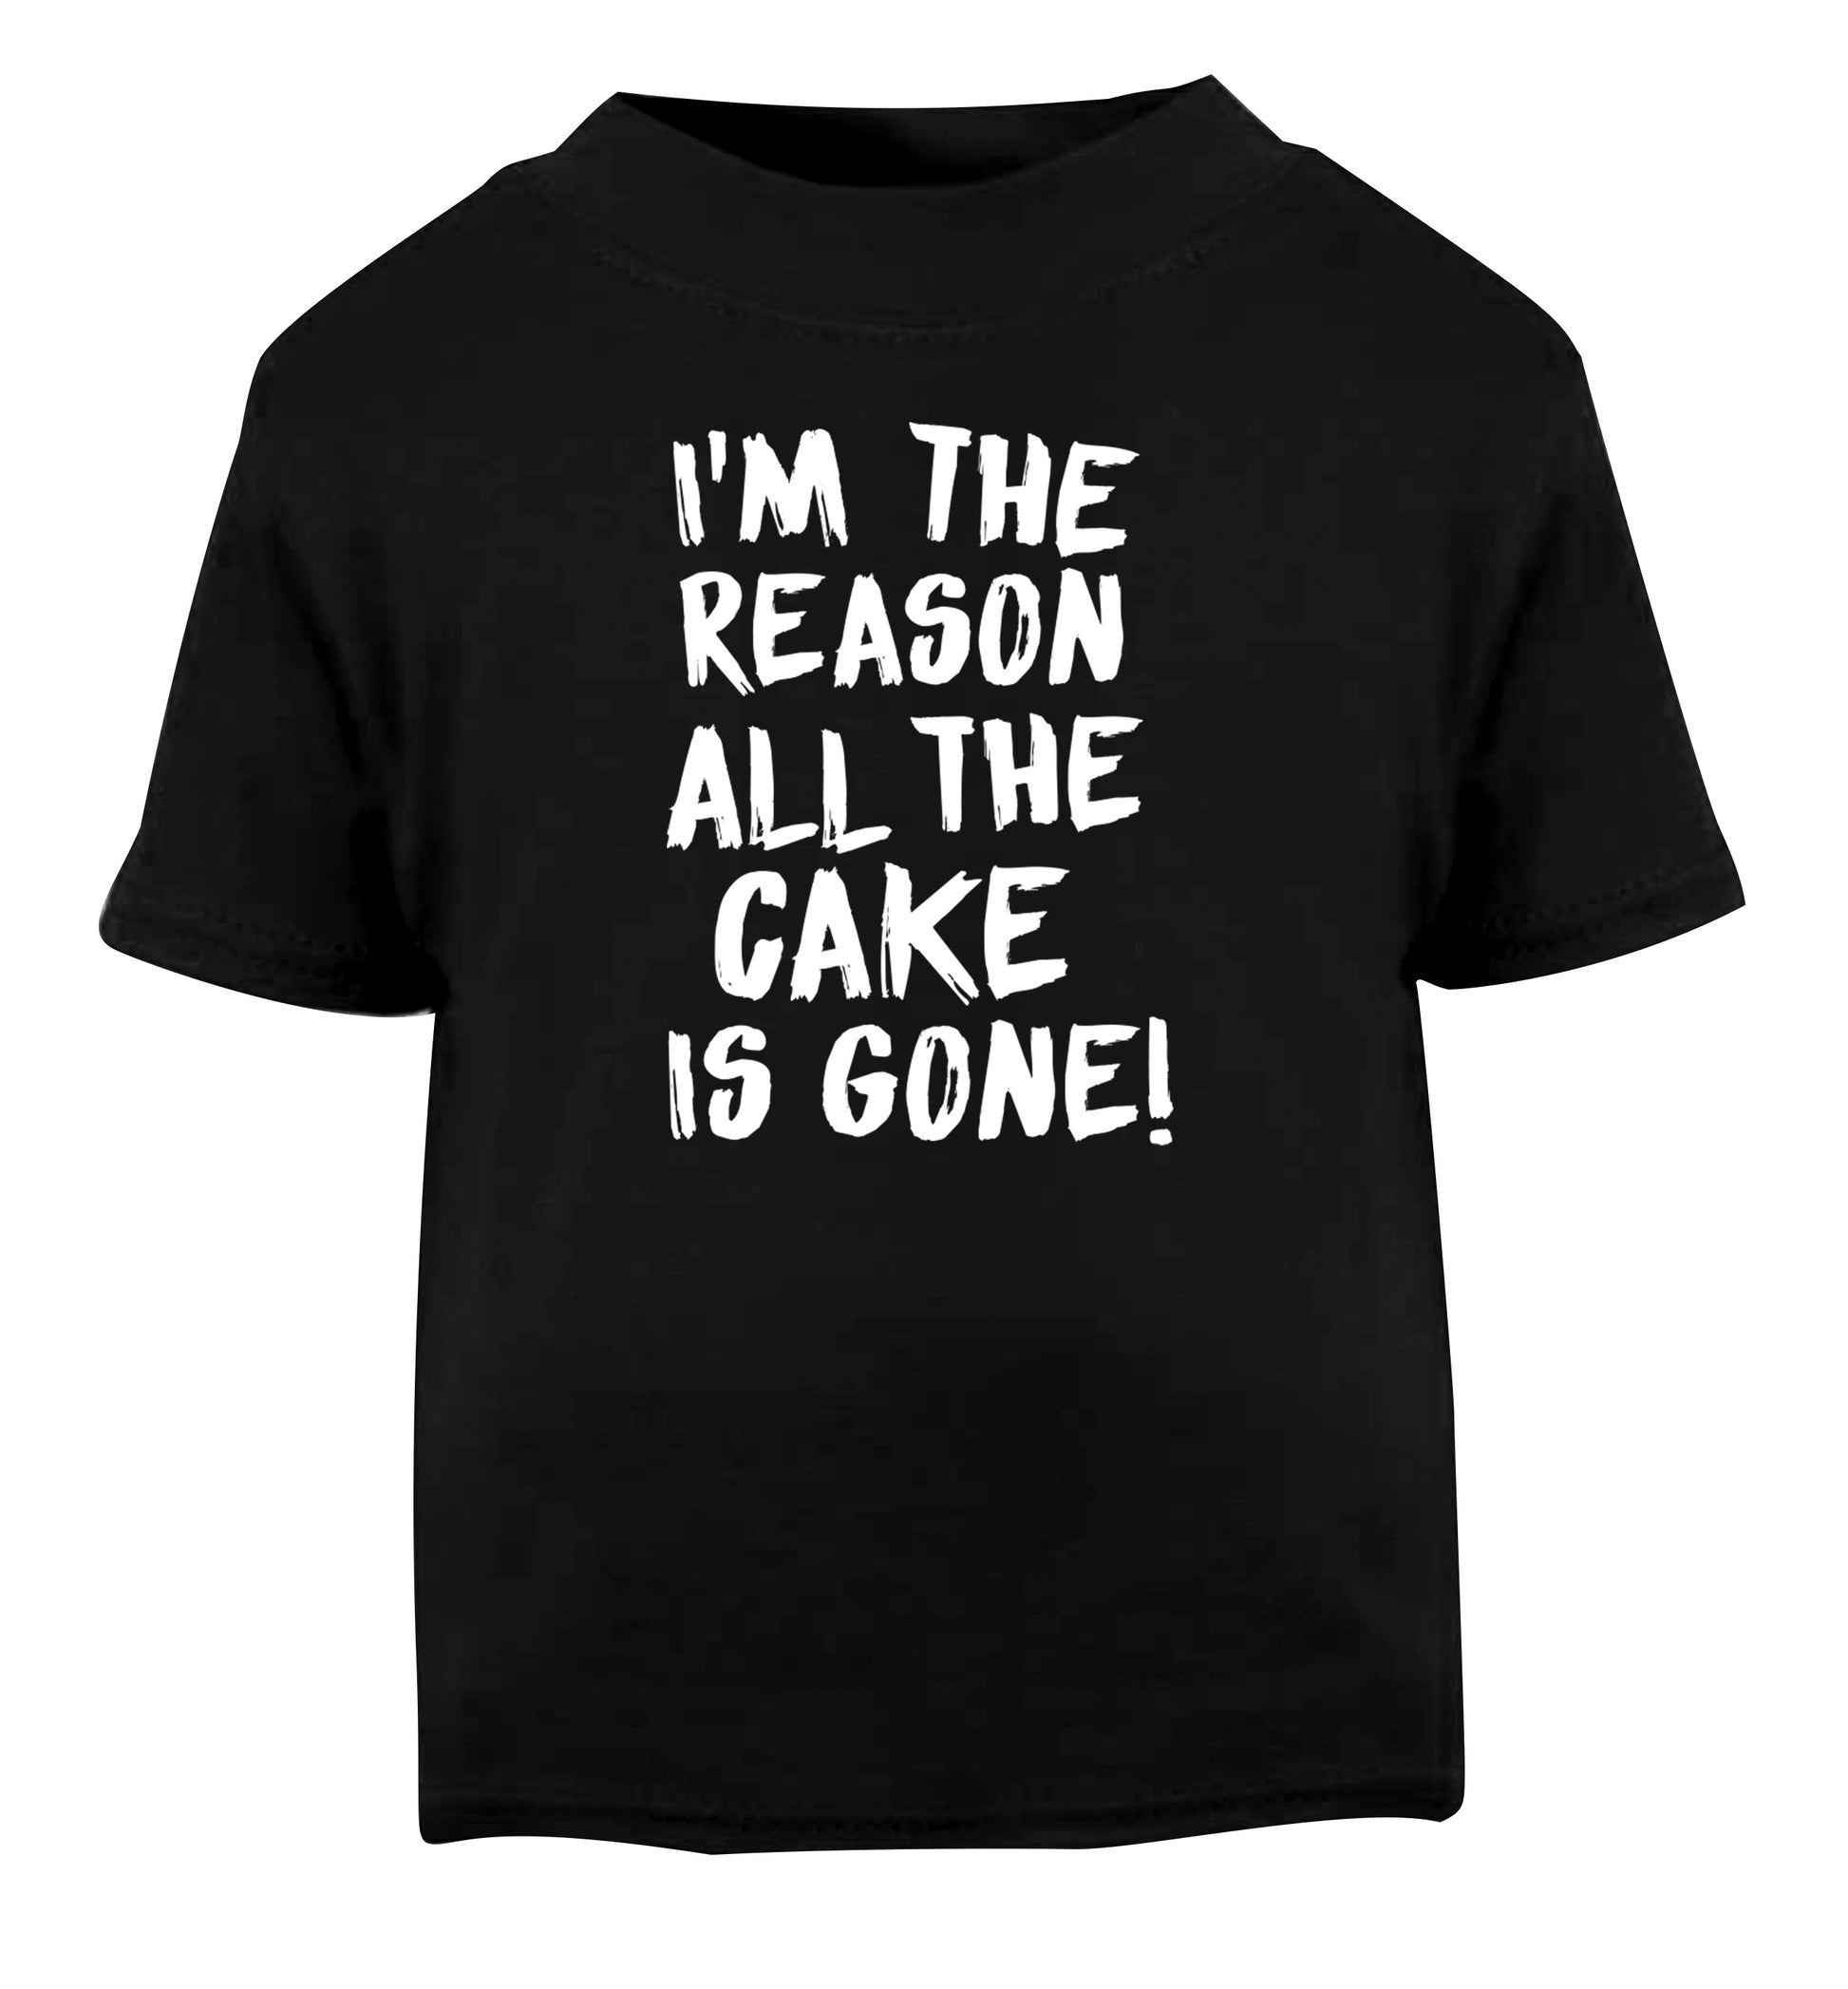 I'm the reason all the cake is gone Black Baby Toddler Tshirt 2 years